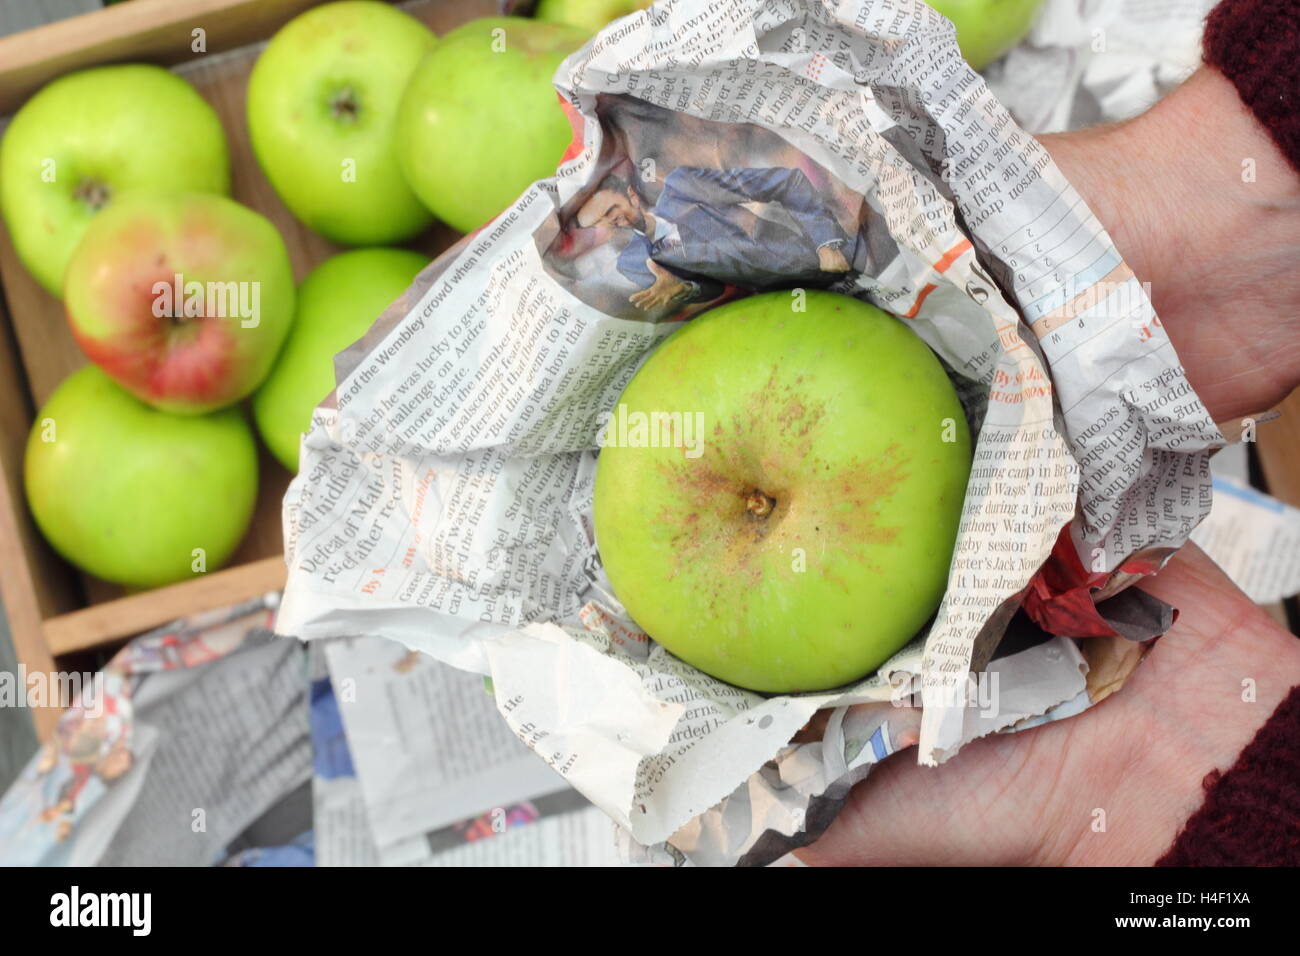 Fresh, unblemished Bramley apples (malus domestica Bramley's Seedling) are individually wrapped in newspaper ready for storage Stock Photo